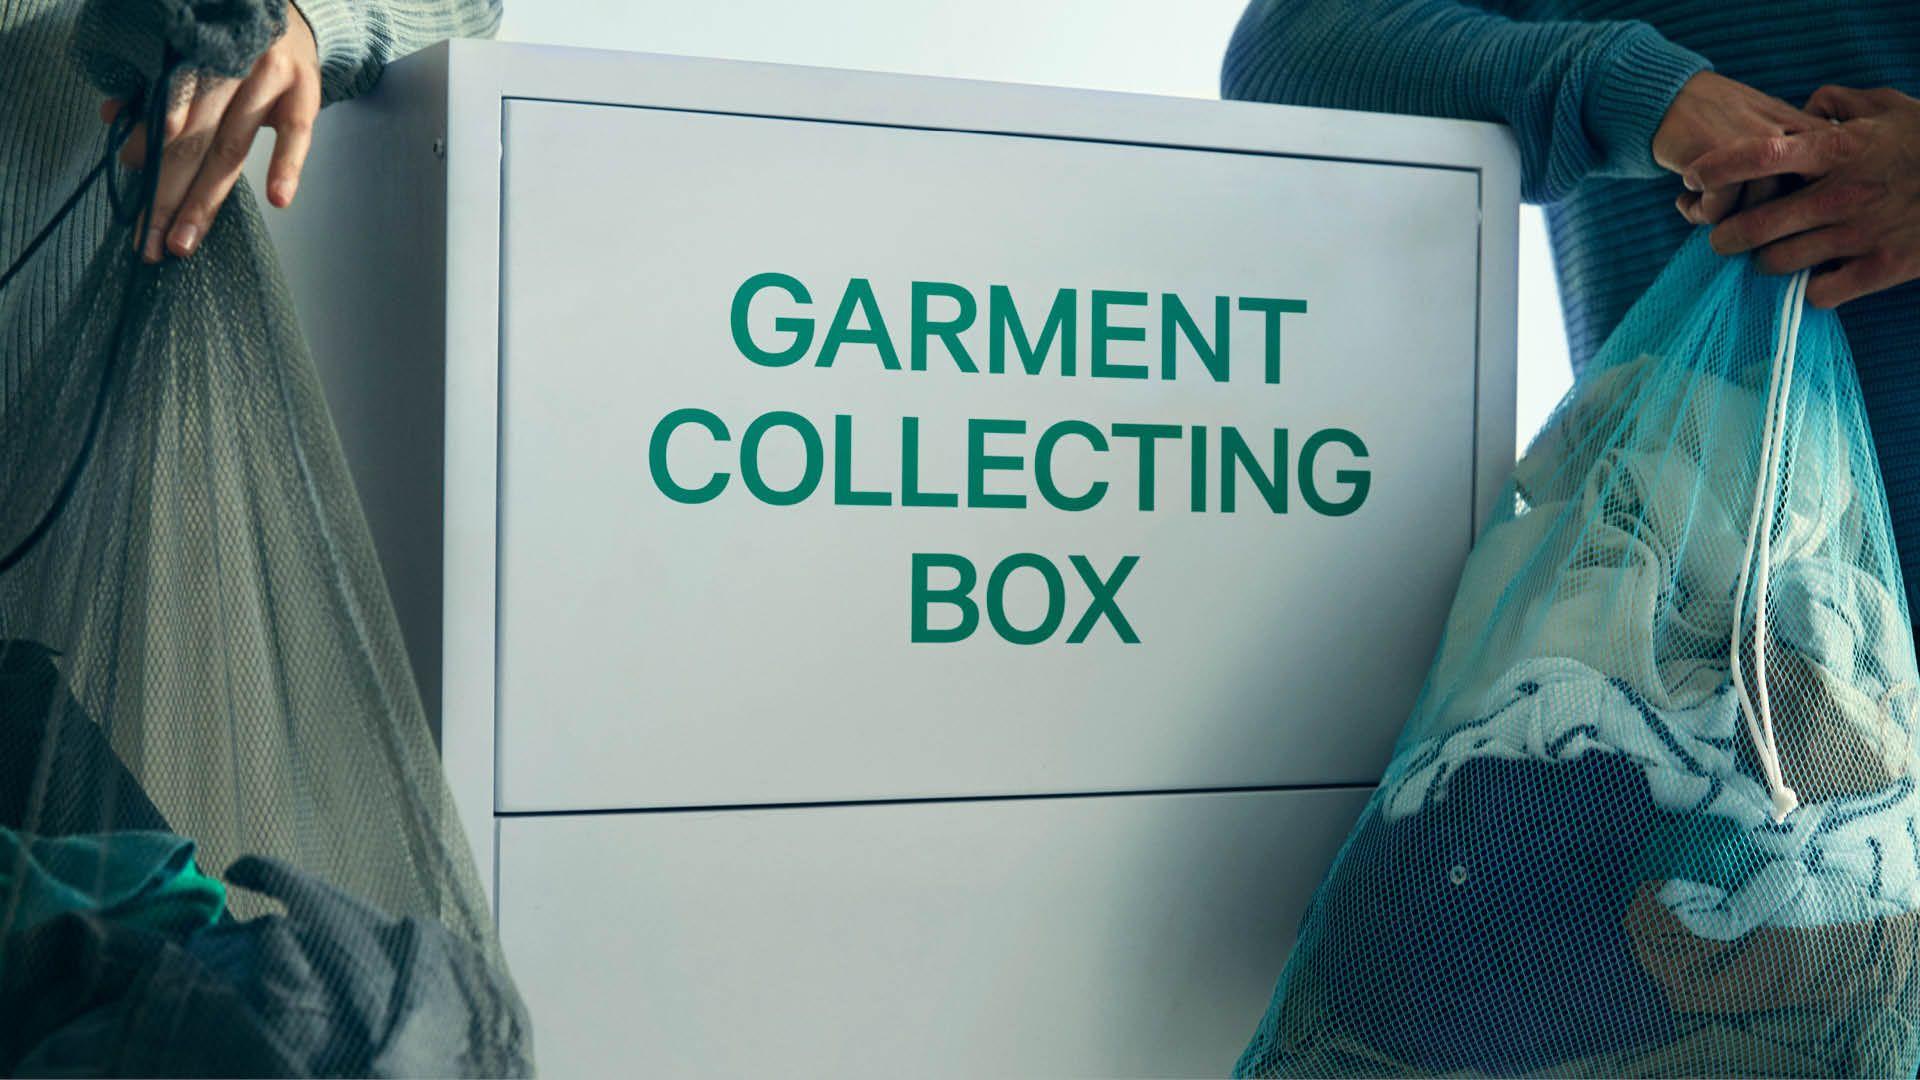 Garment Recycling with H&M - Pretty Little London